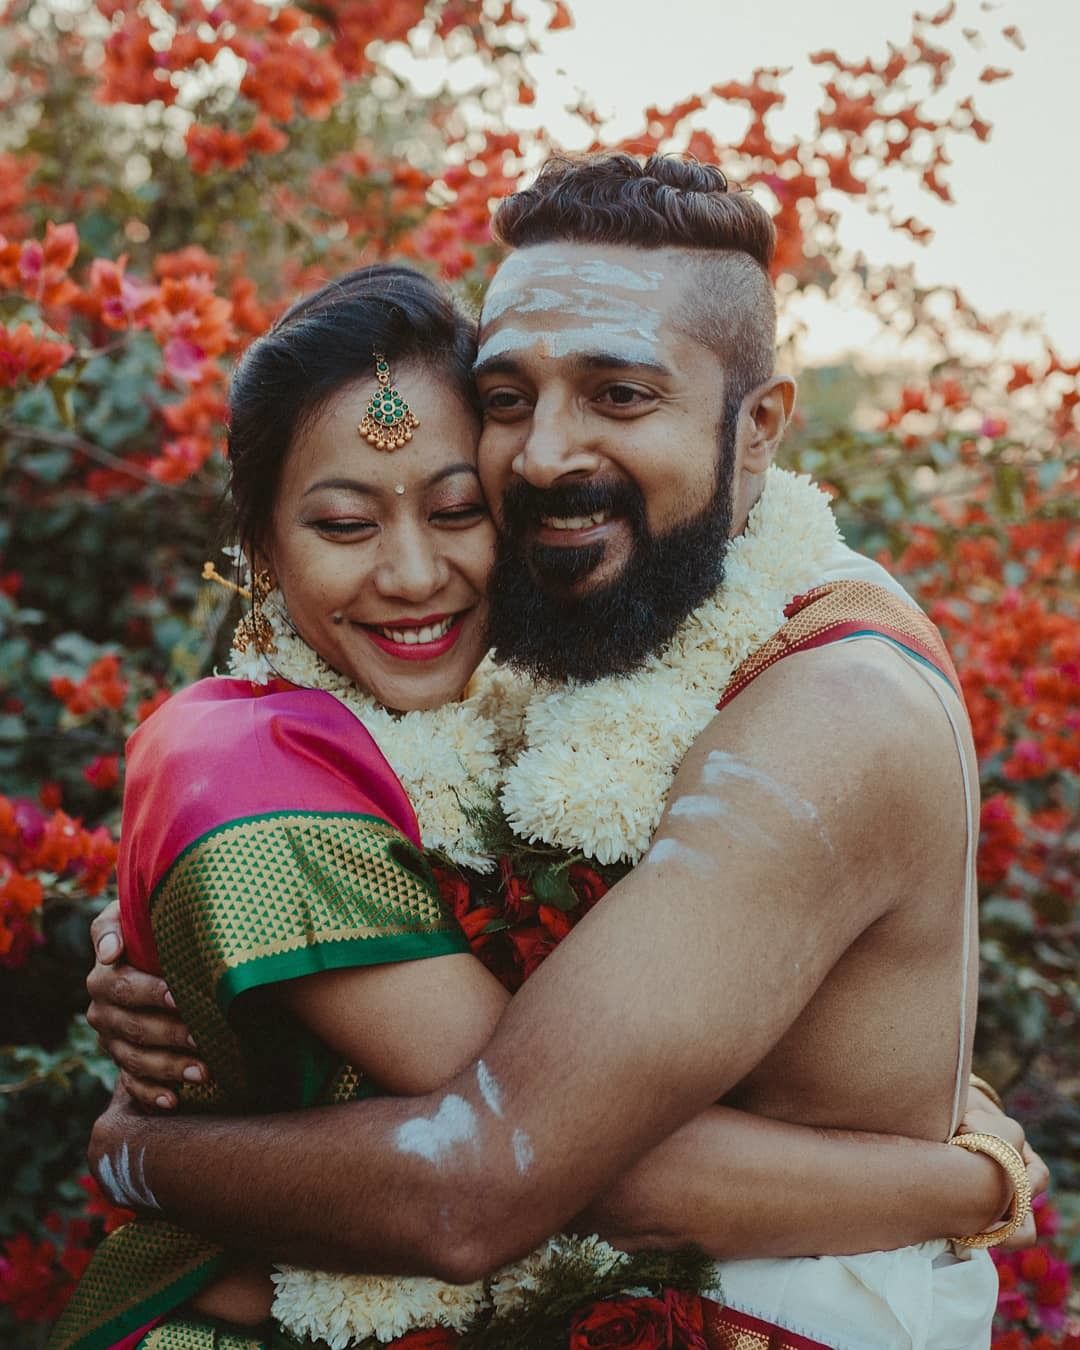 Cant Stop Smiling Looking At These Adorable South Indian Couple Shots 